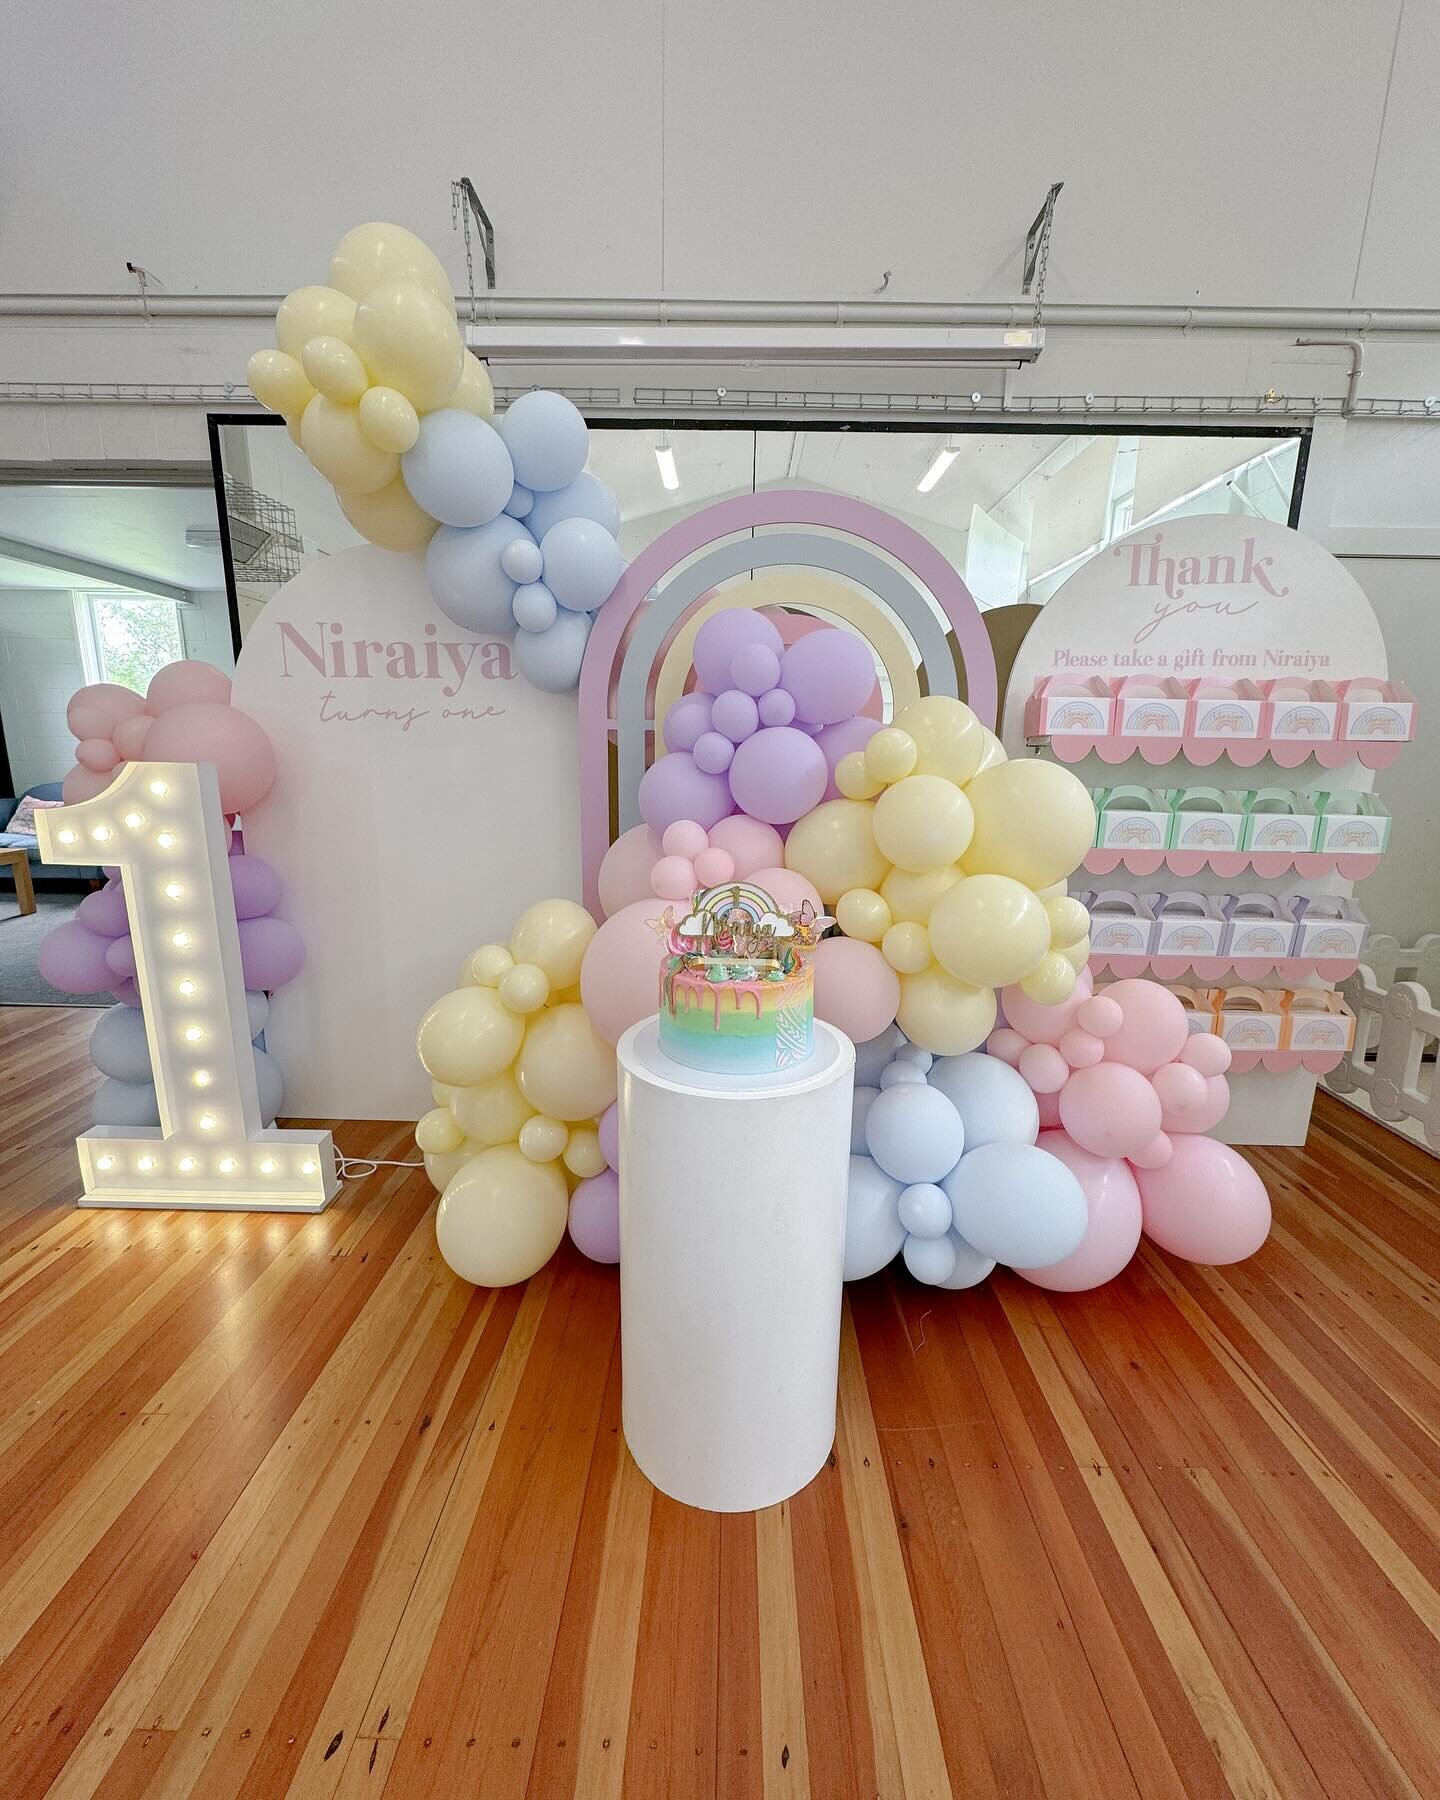 Our pastel rainbow themed setup. 🌈 💜🩷

This setup has been so popular lately . 
Our pastel rainbow arch can be paired with either a white, pink, lilac or blue backdrop and comes with a light up number to make a gorgeous pastel themed 1st backdrop.